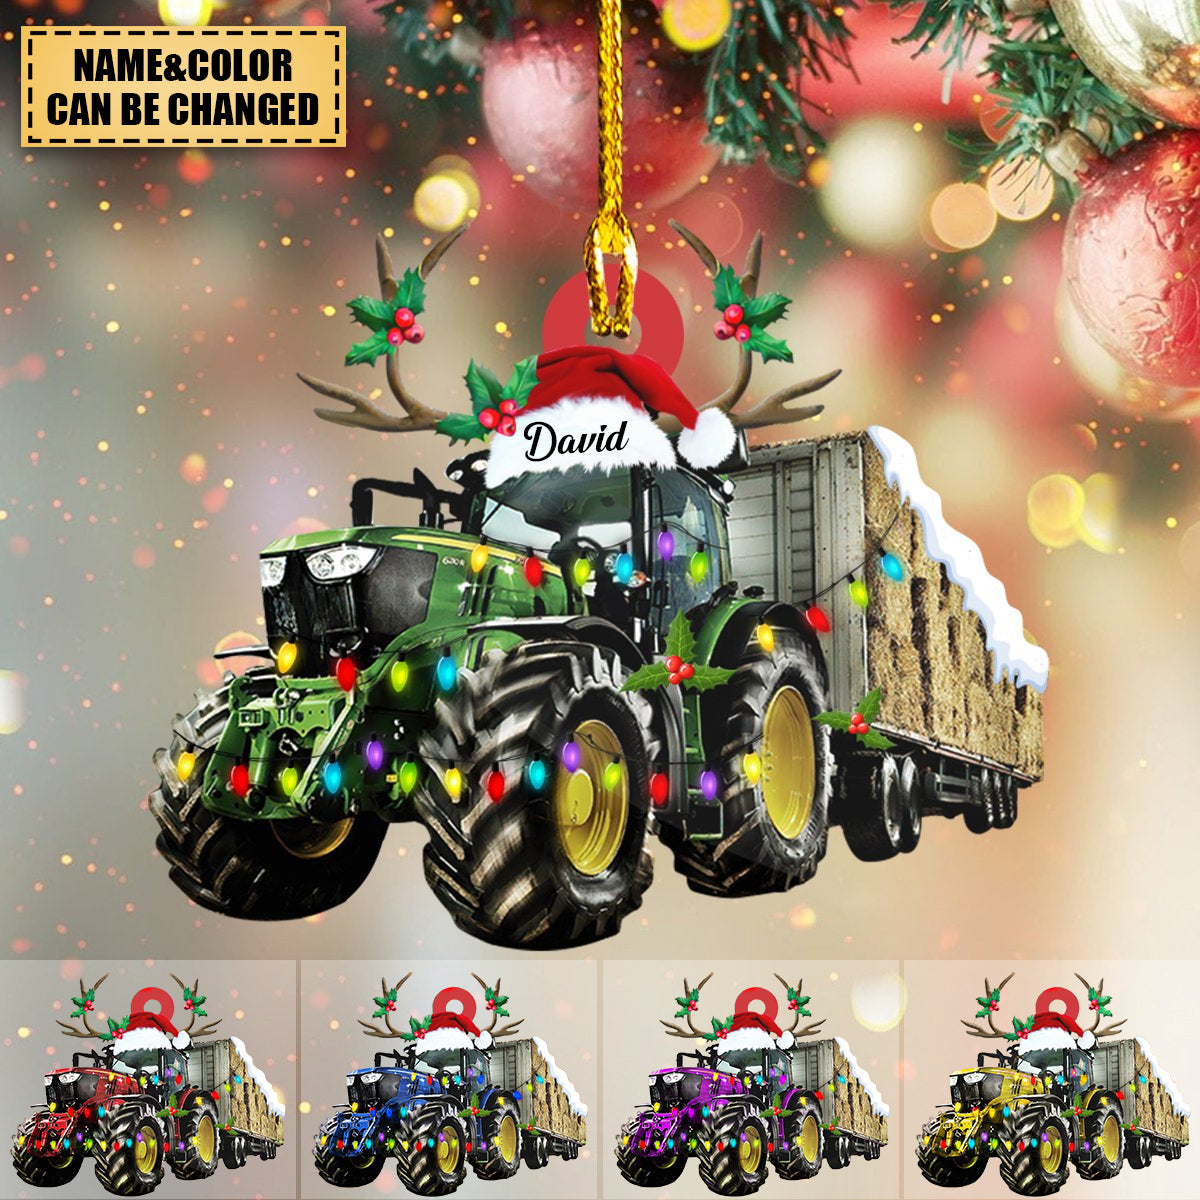 Personalized Tractor Christmas Ornament - Gift for Farmer